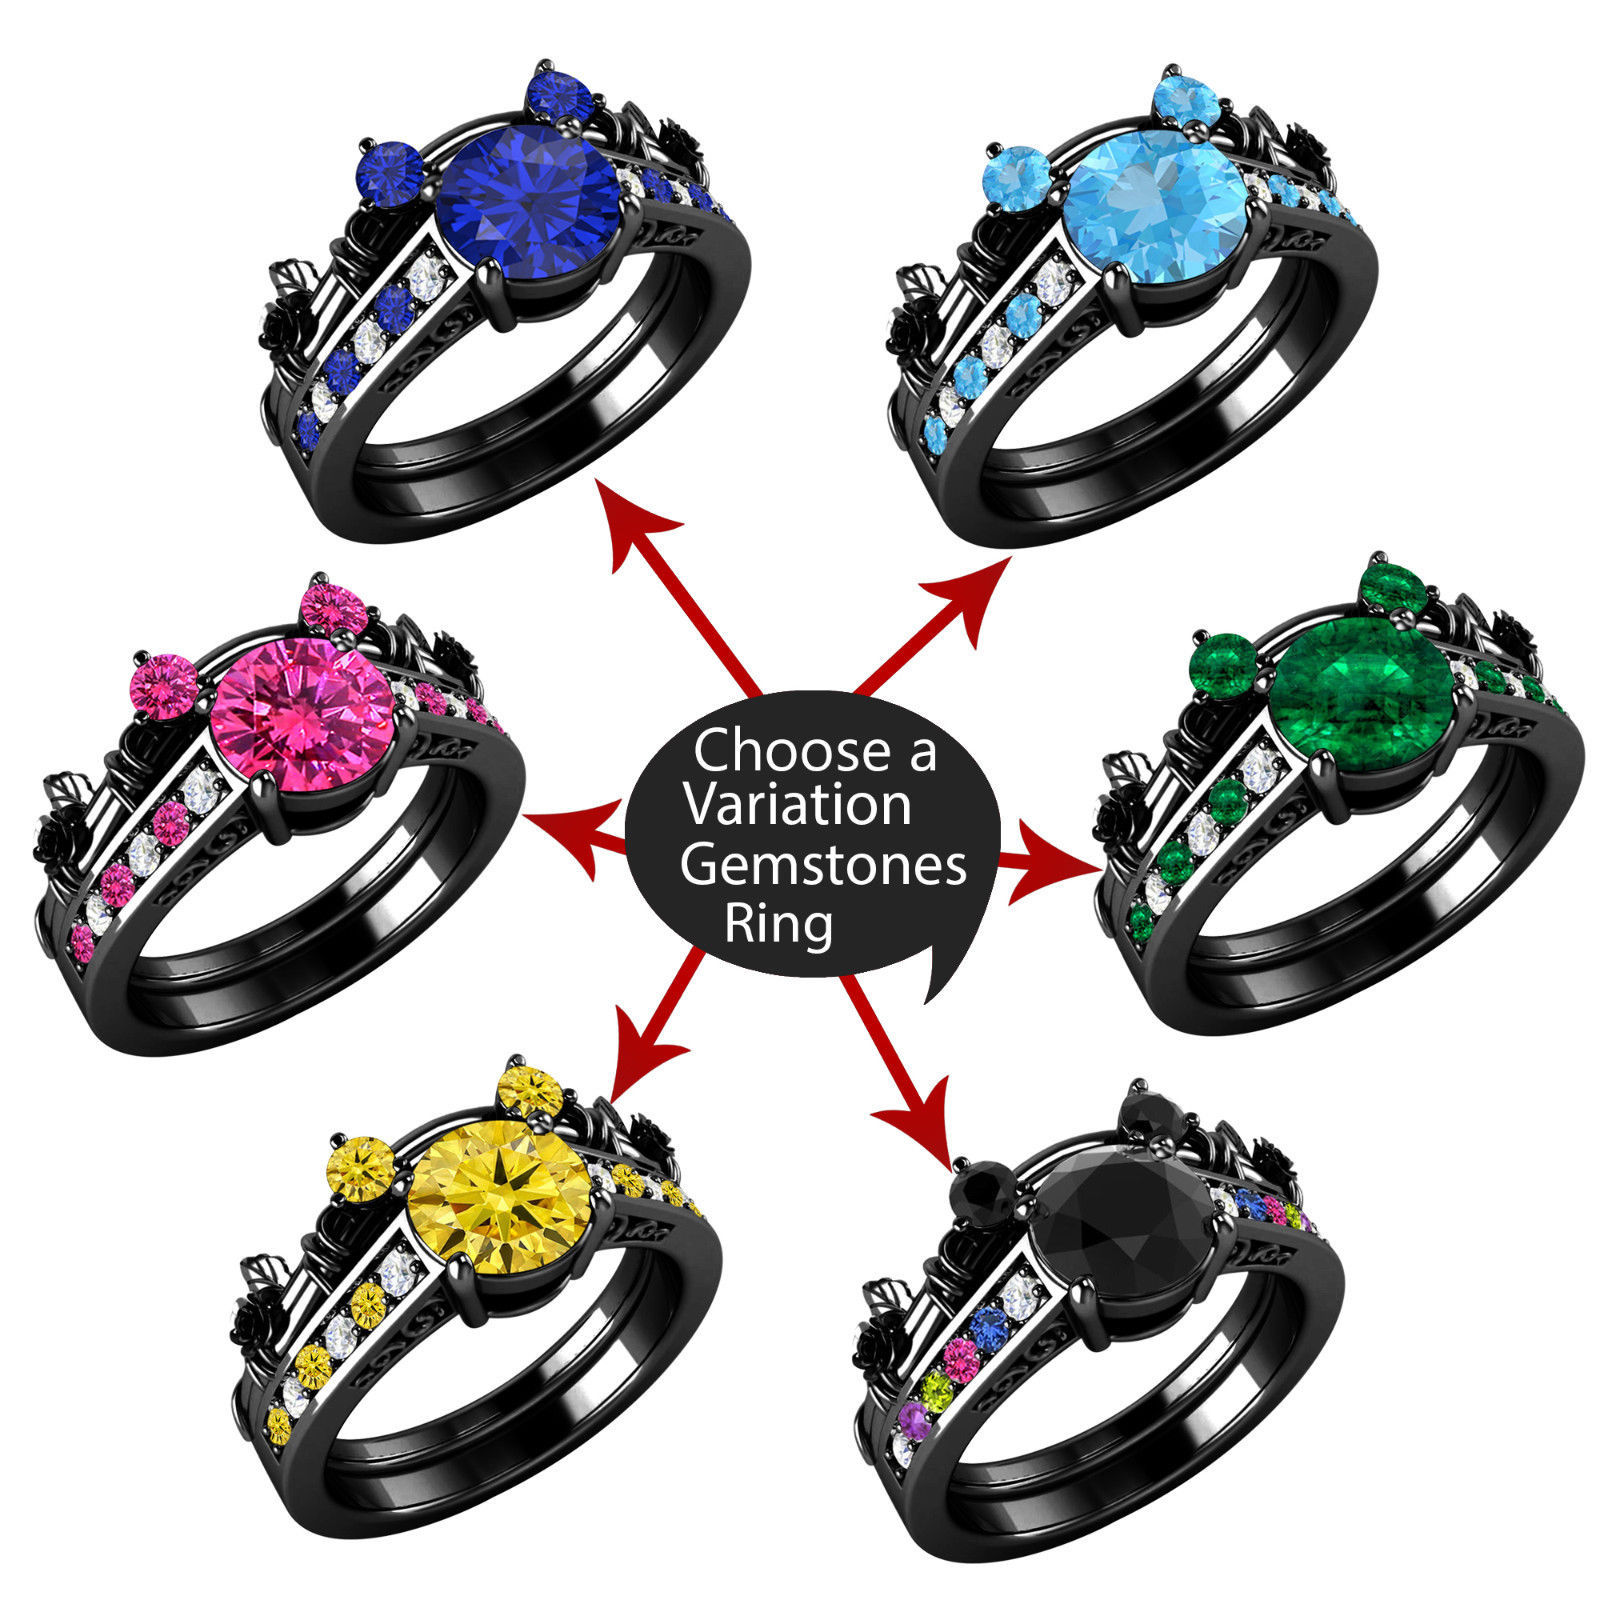 Black Gold Plated .925 Sterling Silver Multi-Stone Mickey Mouse Bridal Ring Set